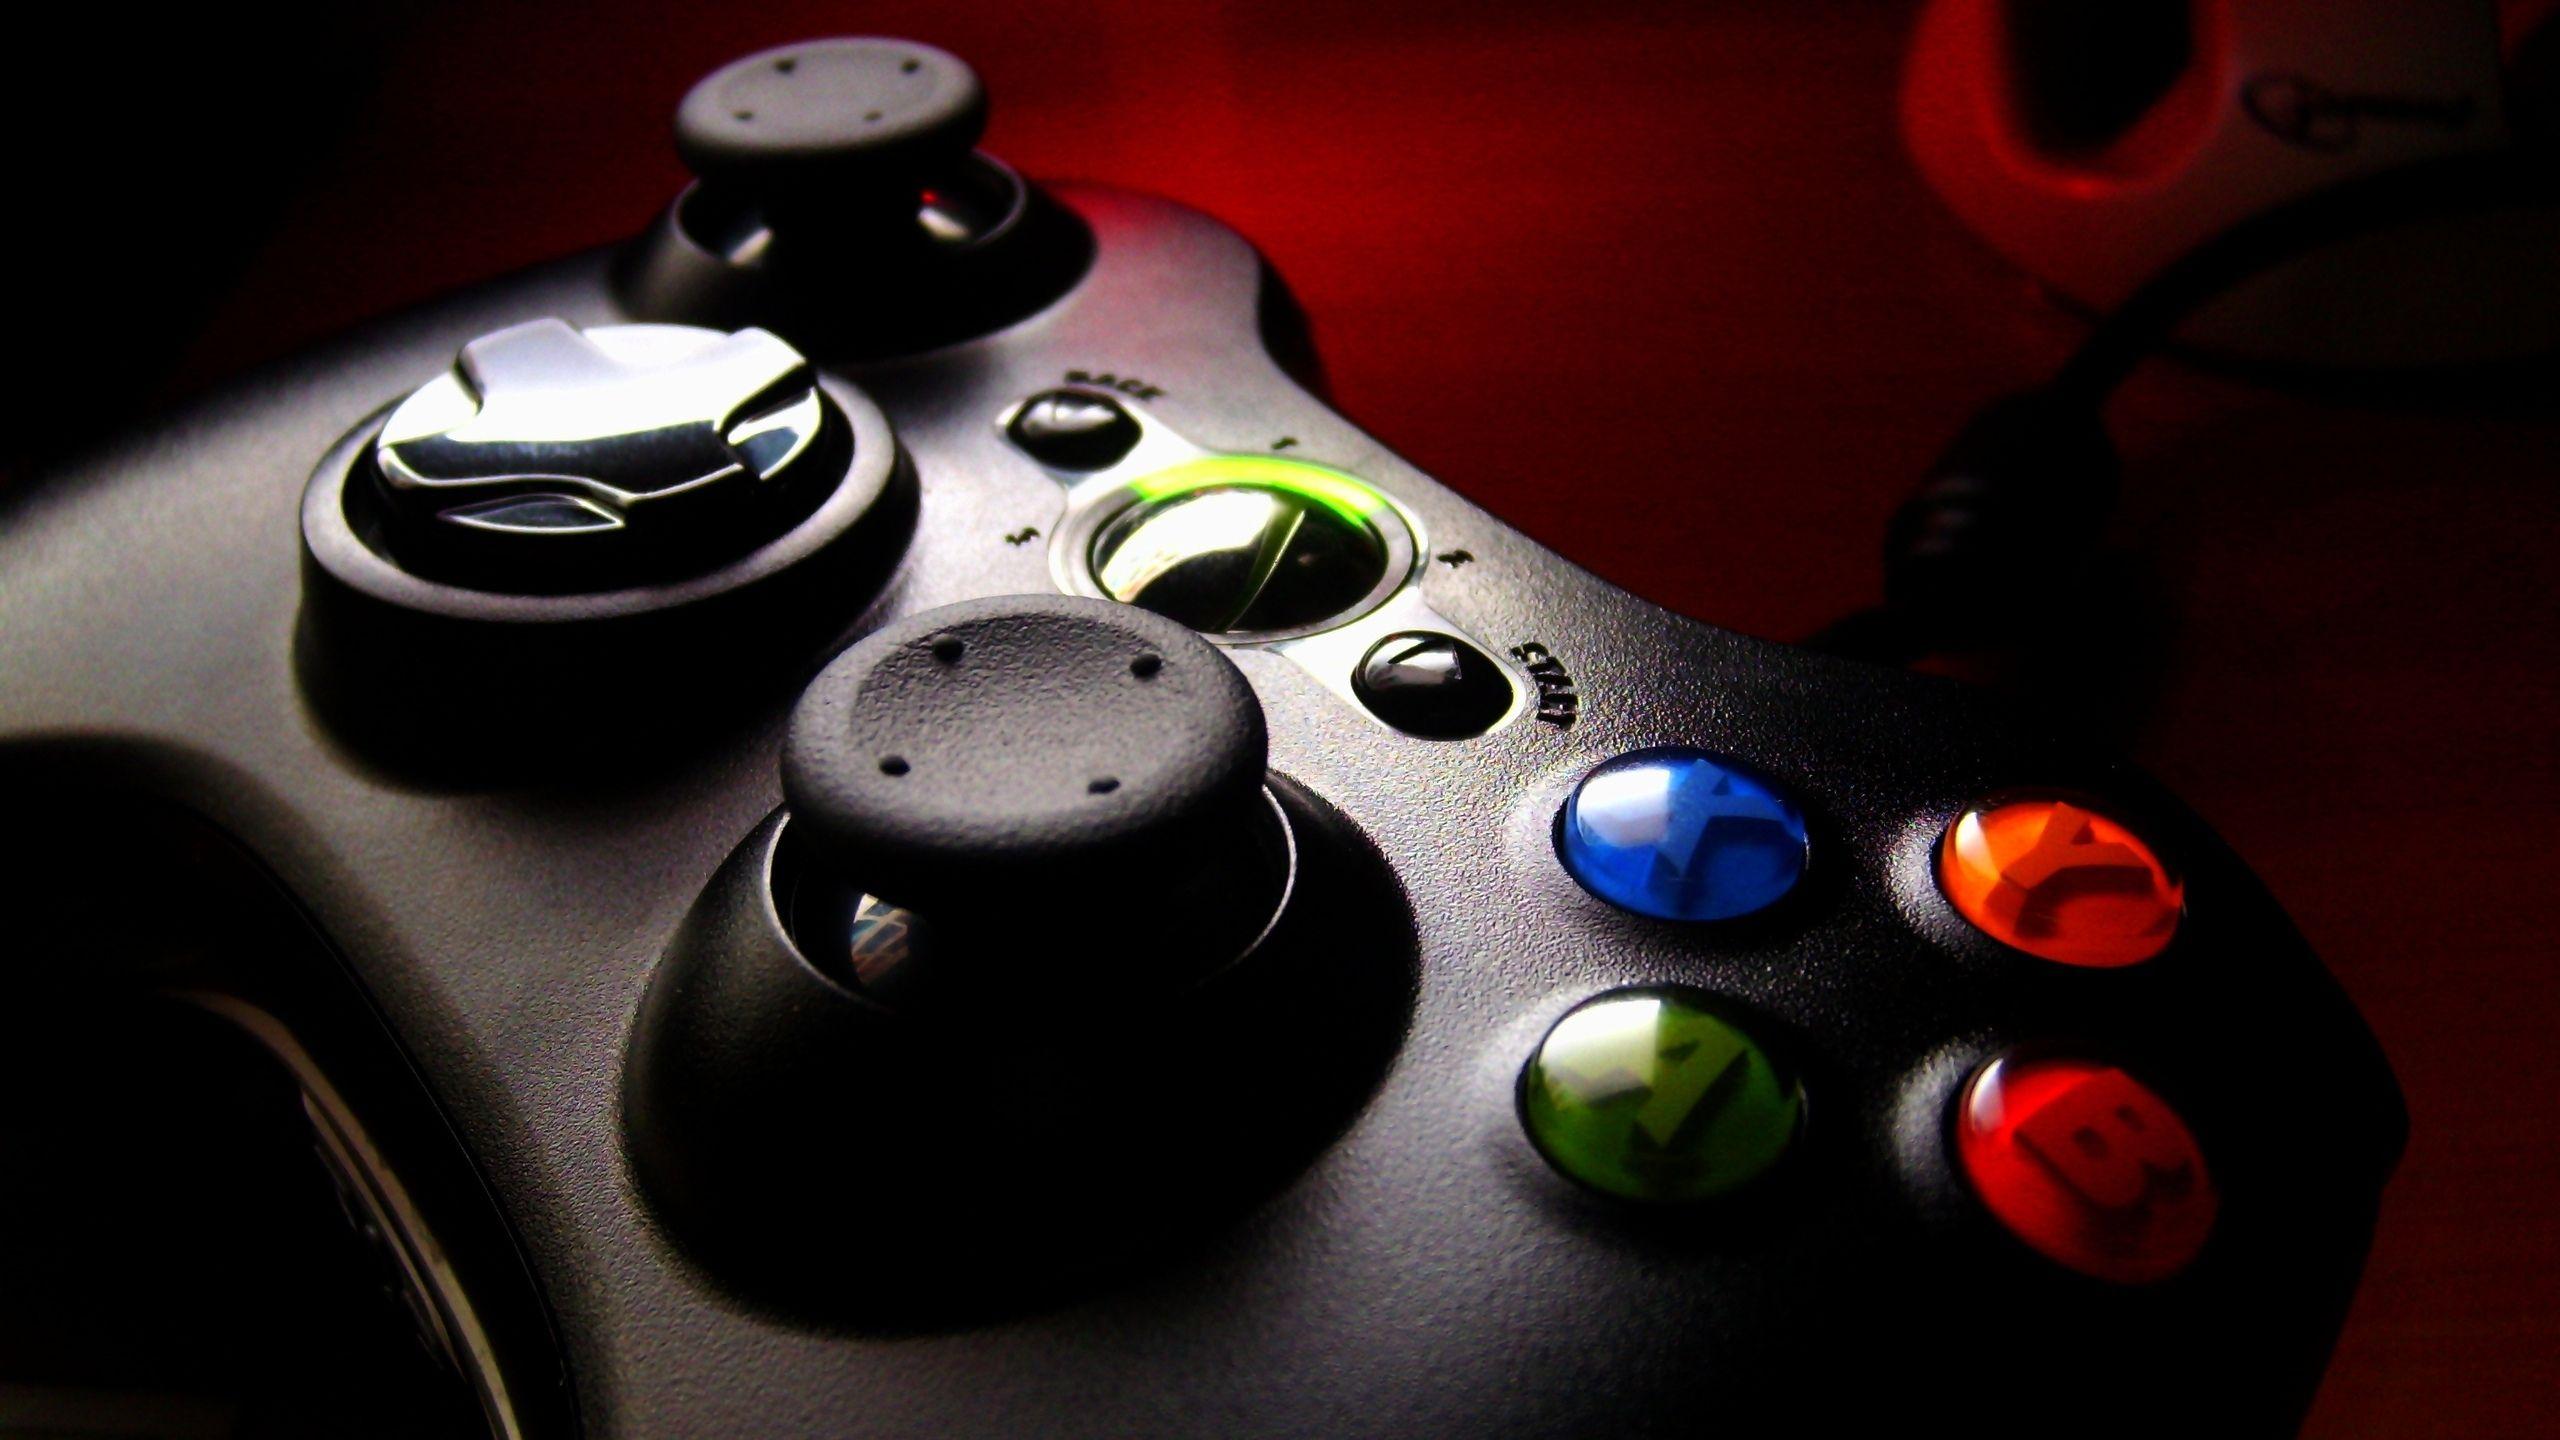 Download wallpaper gamepad, xbox video game consoles